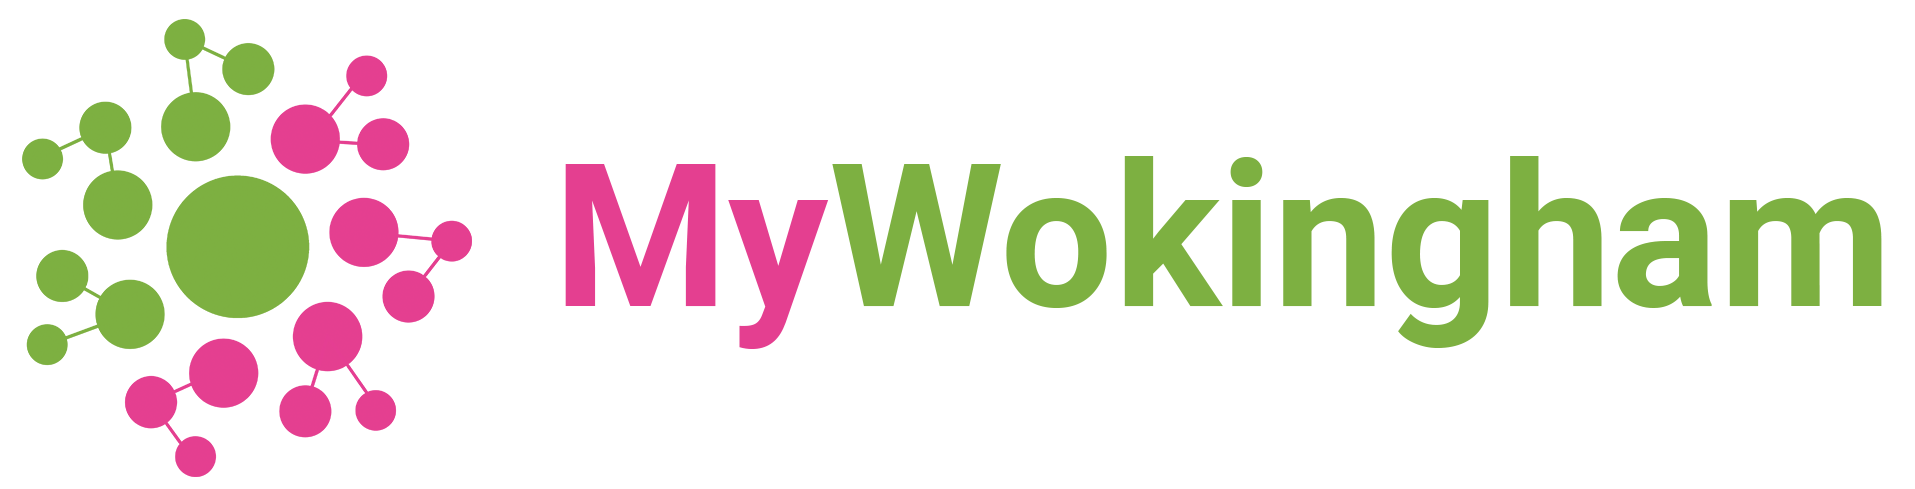 Wokingham Berkshire sees the Launch of 'My Wokingham' Which Aims To Put Every Wokingham Business Online